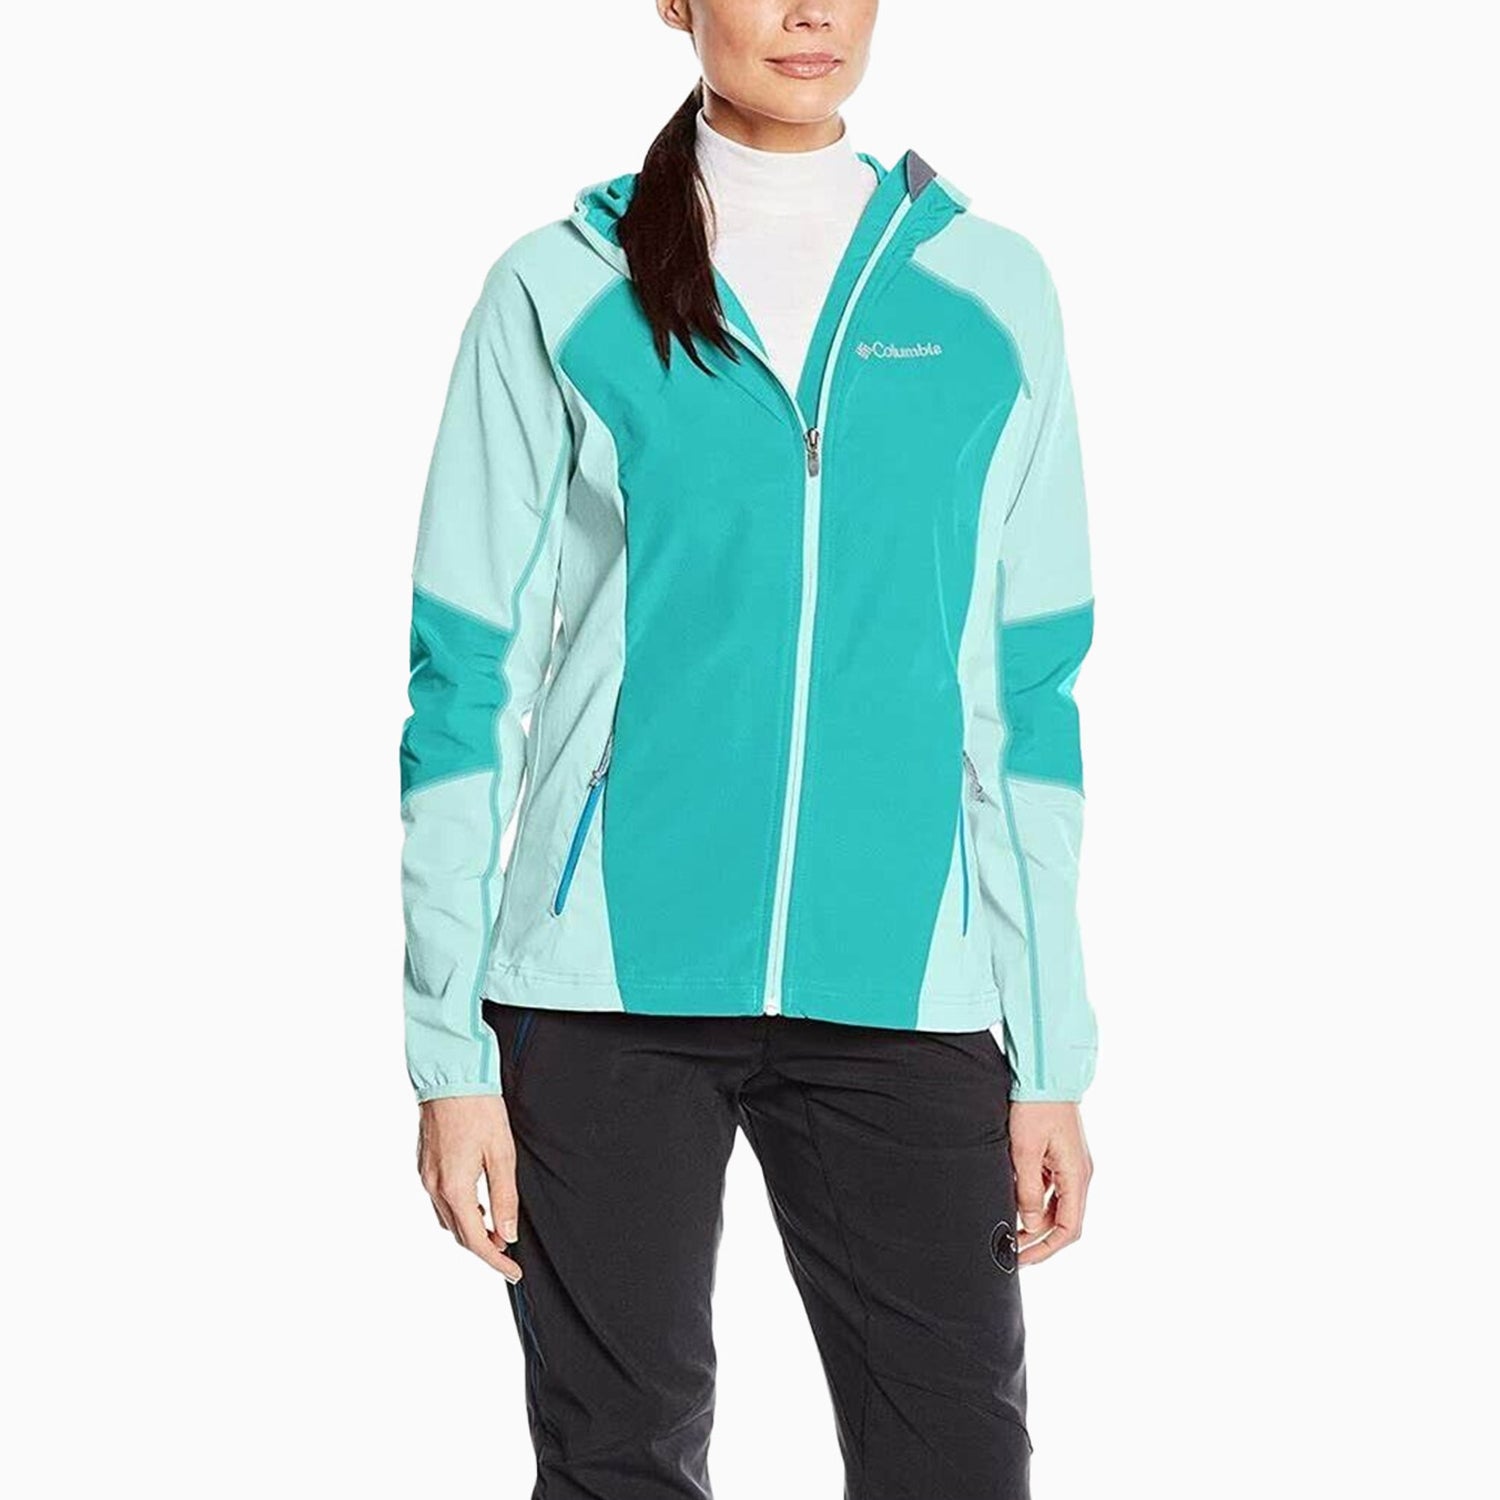 columbia-womens-sweets-as-softshell-jacket-ww3057-354t